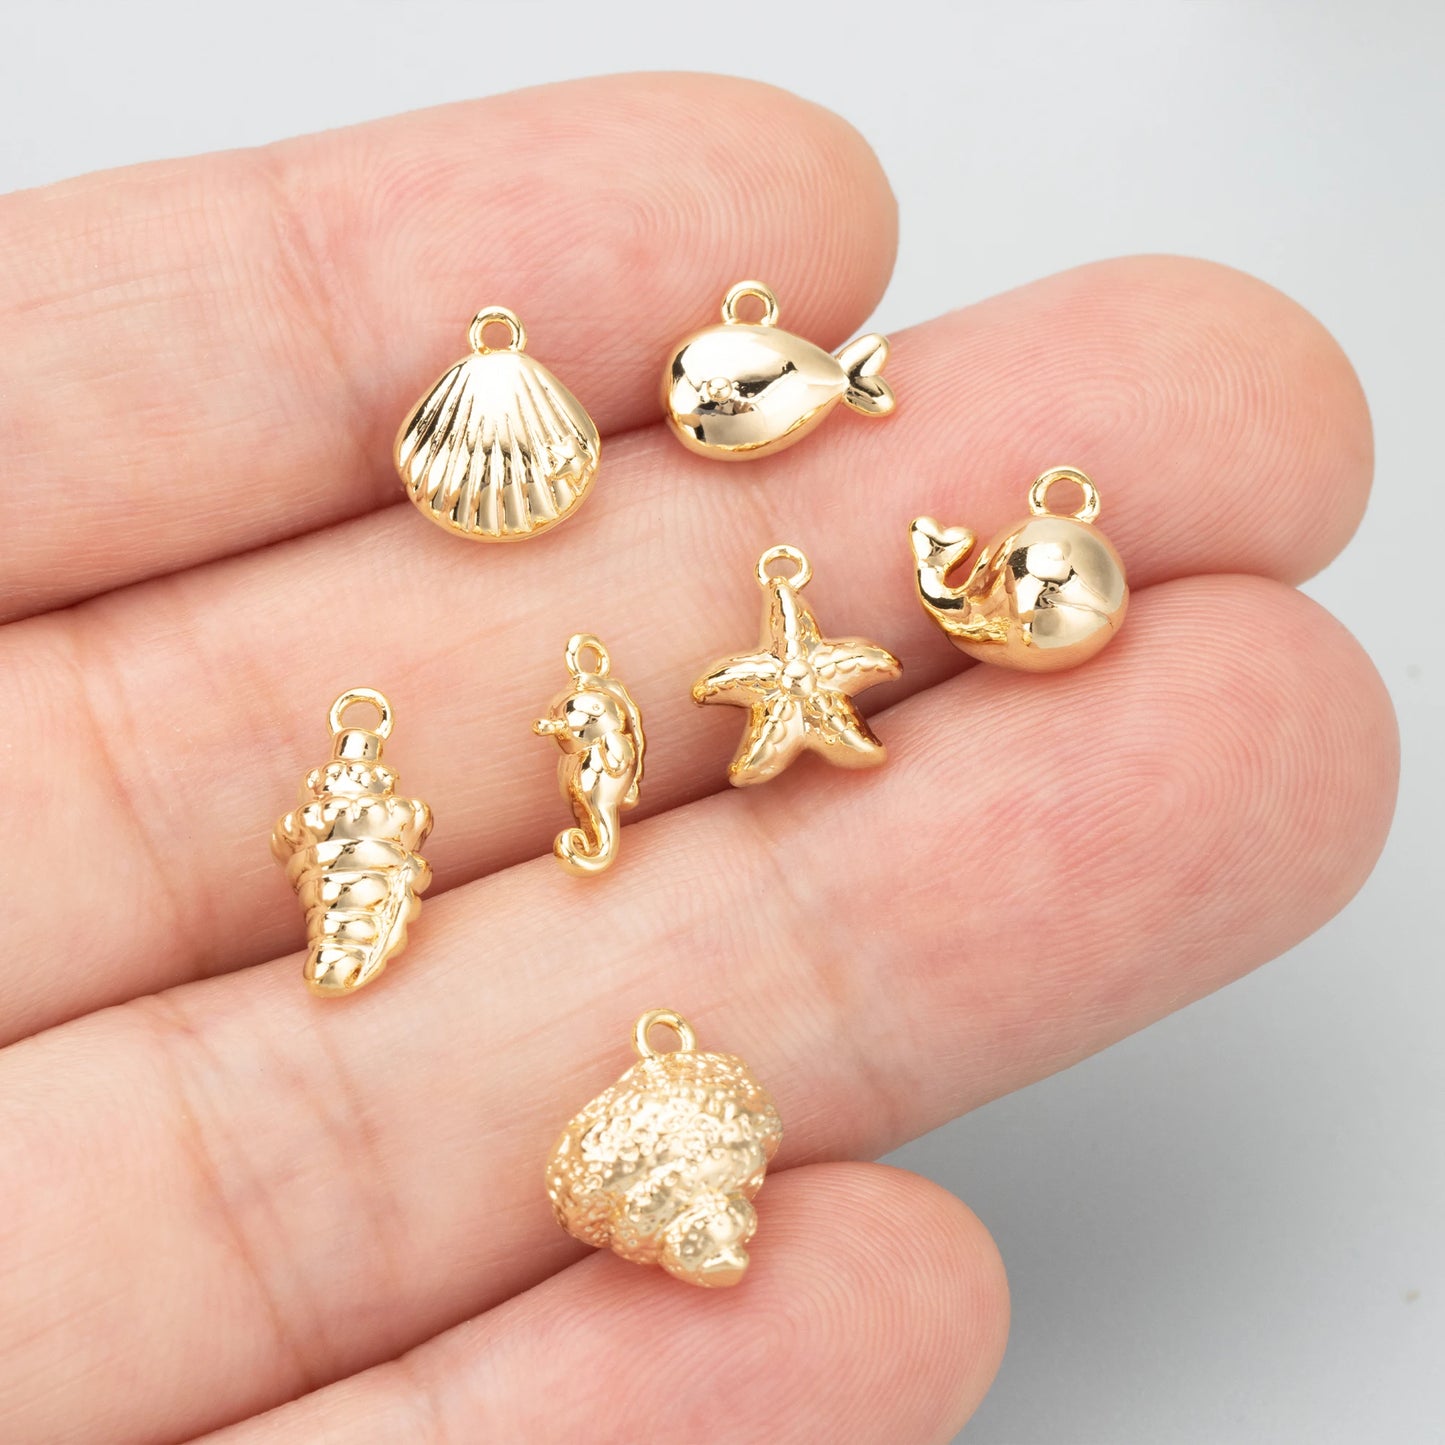 GUFEATHER MD27,jewelry accessories,18k gold rhodium plated,copper,charms,whale pendants,jewelry making,diy necklace,10pcs/lot